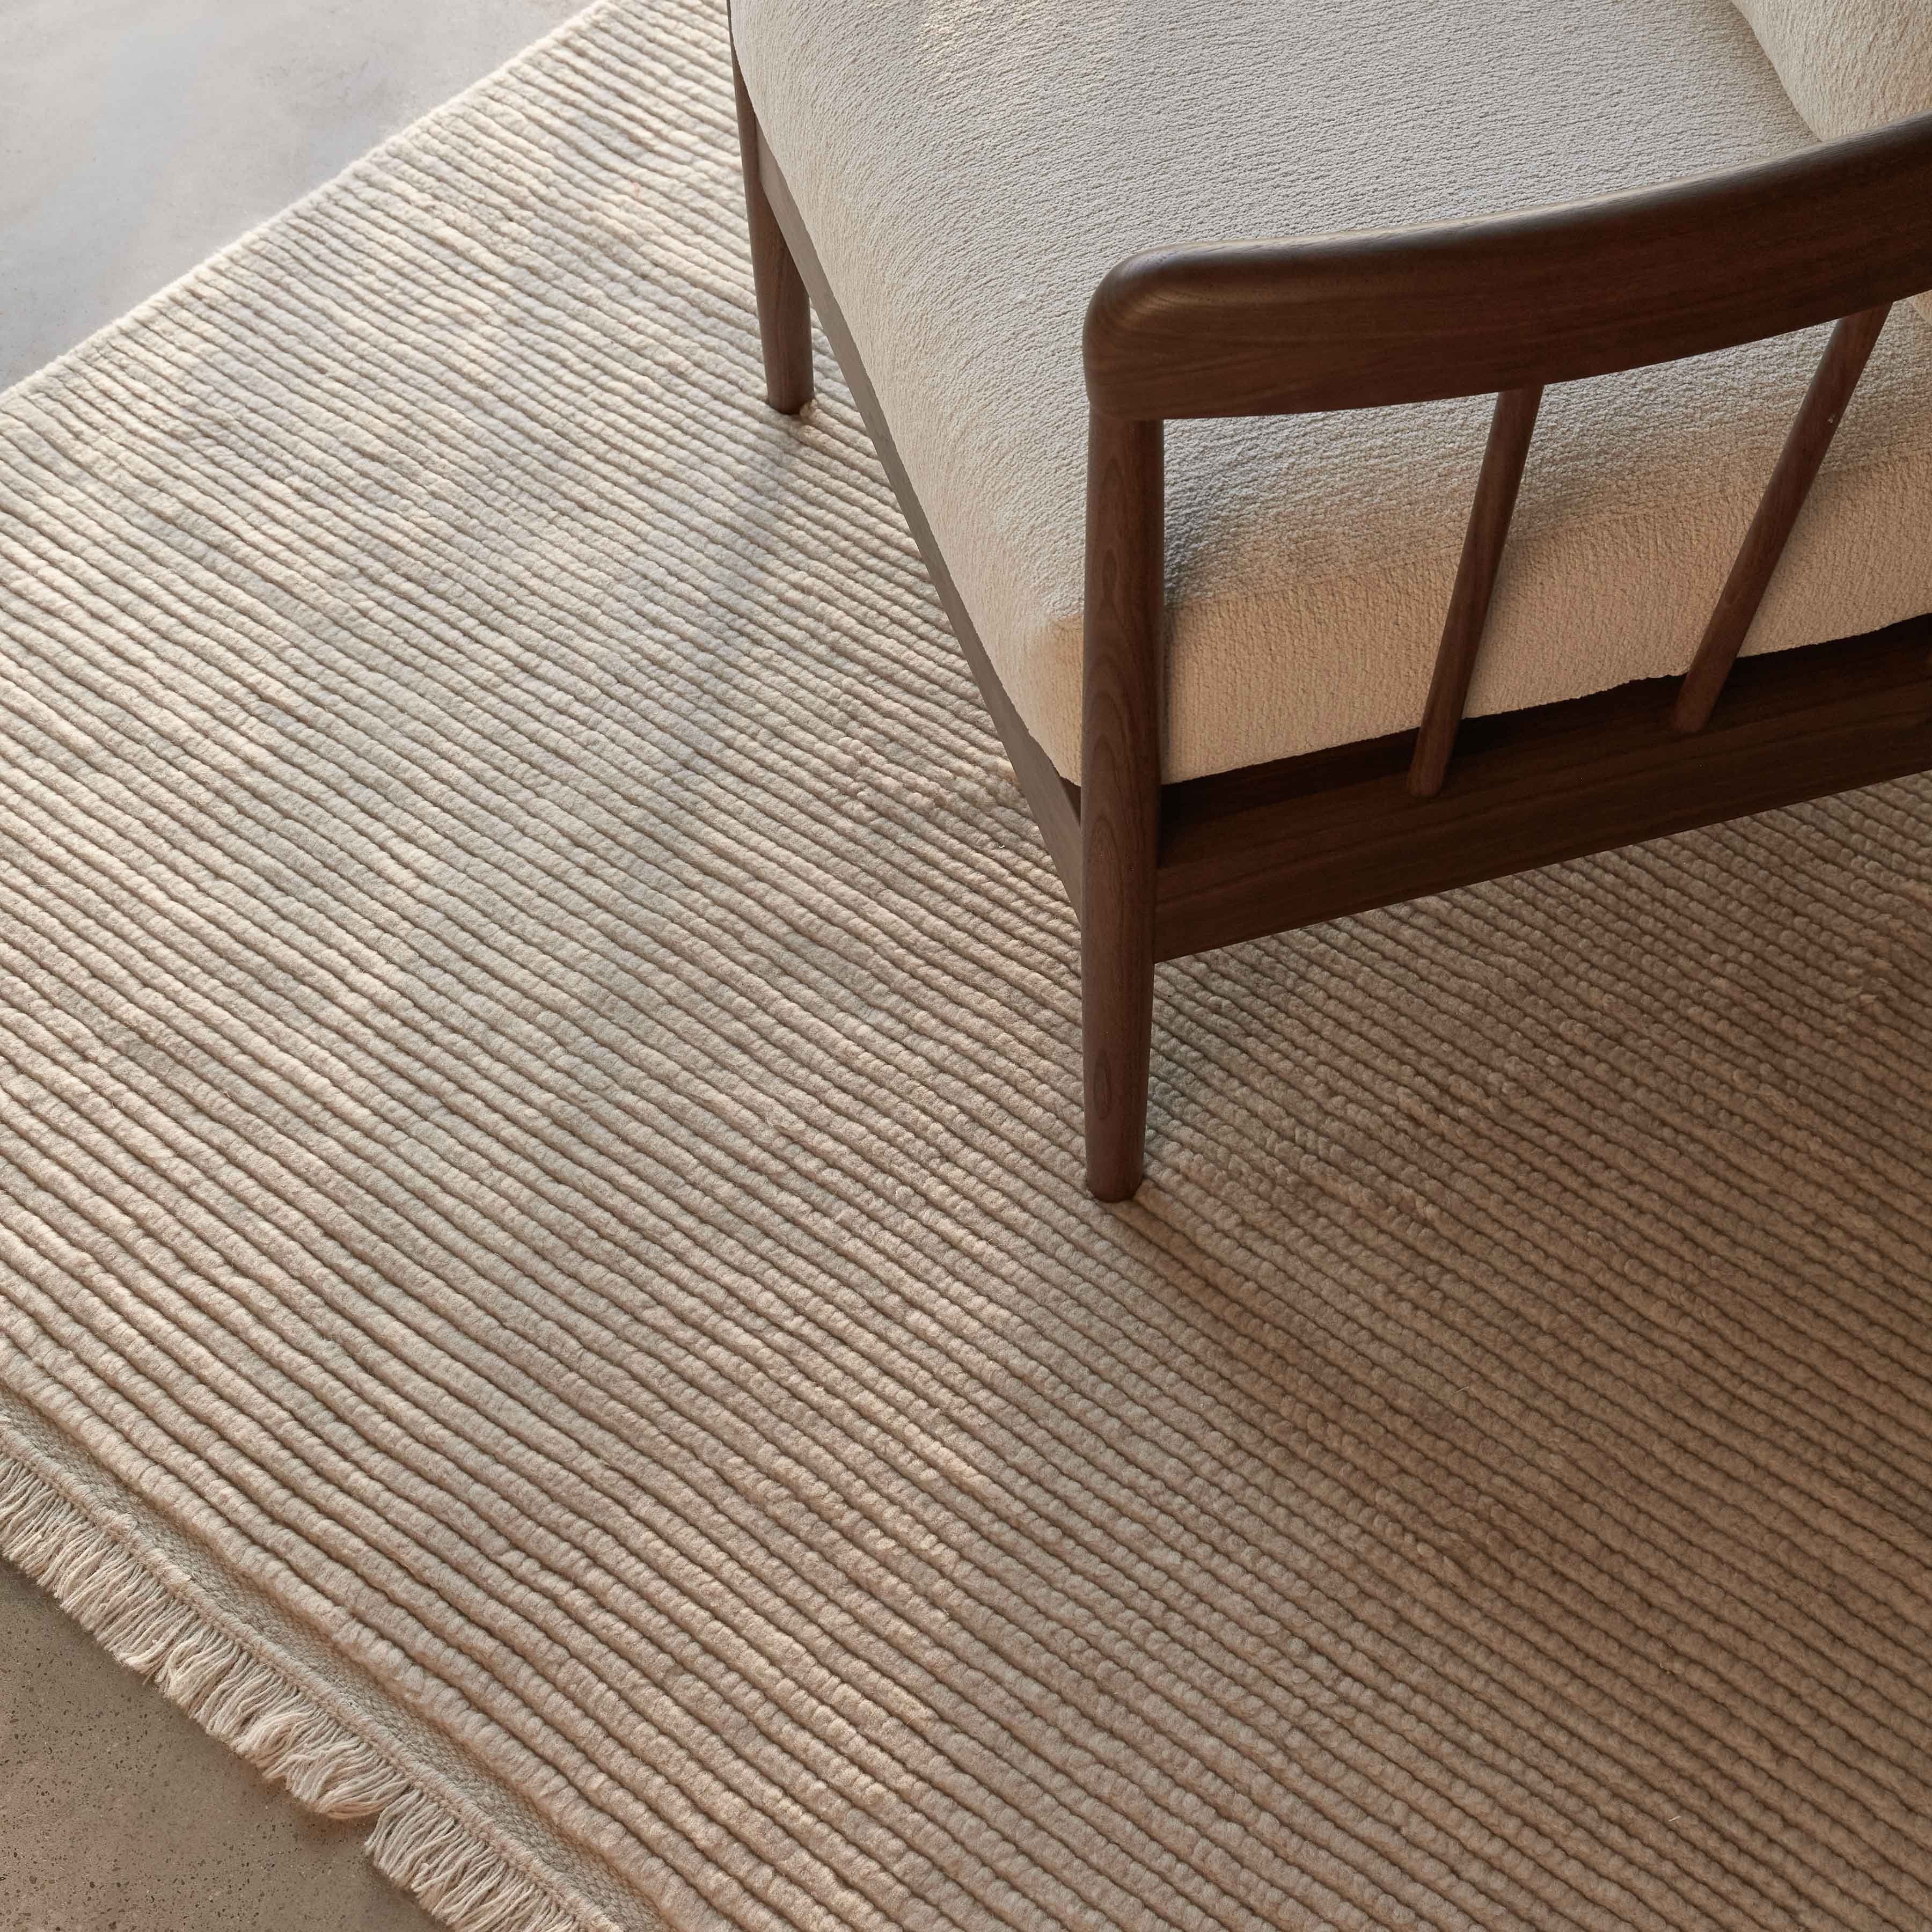 The Citizenry Lata Hand-Knotted Area Rug | 6' x 9' | Browns Tans - Image 2